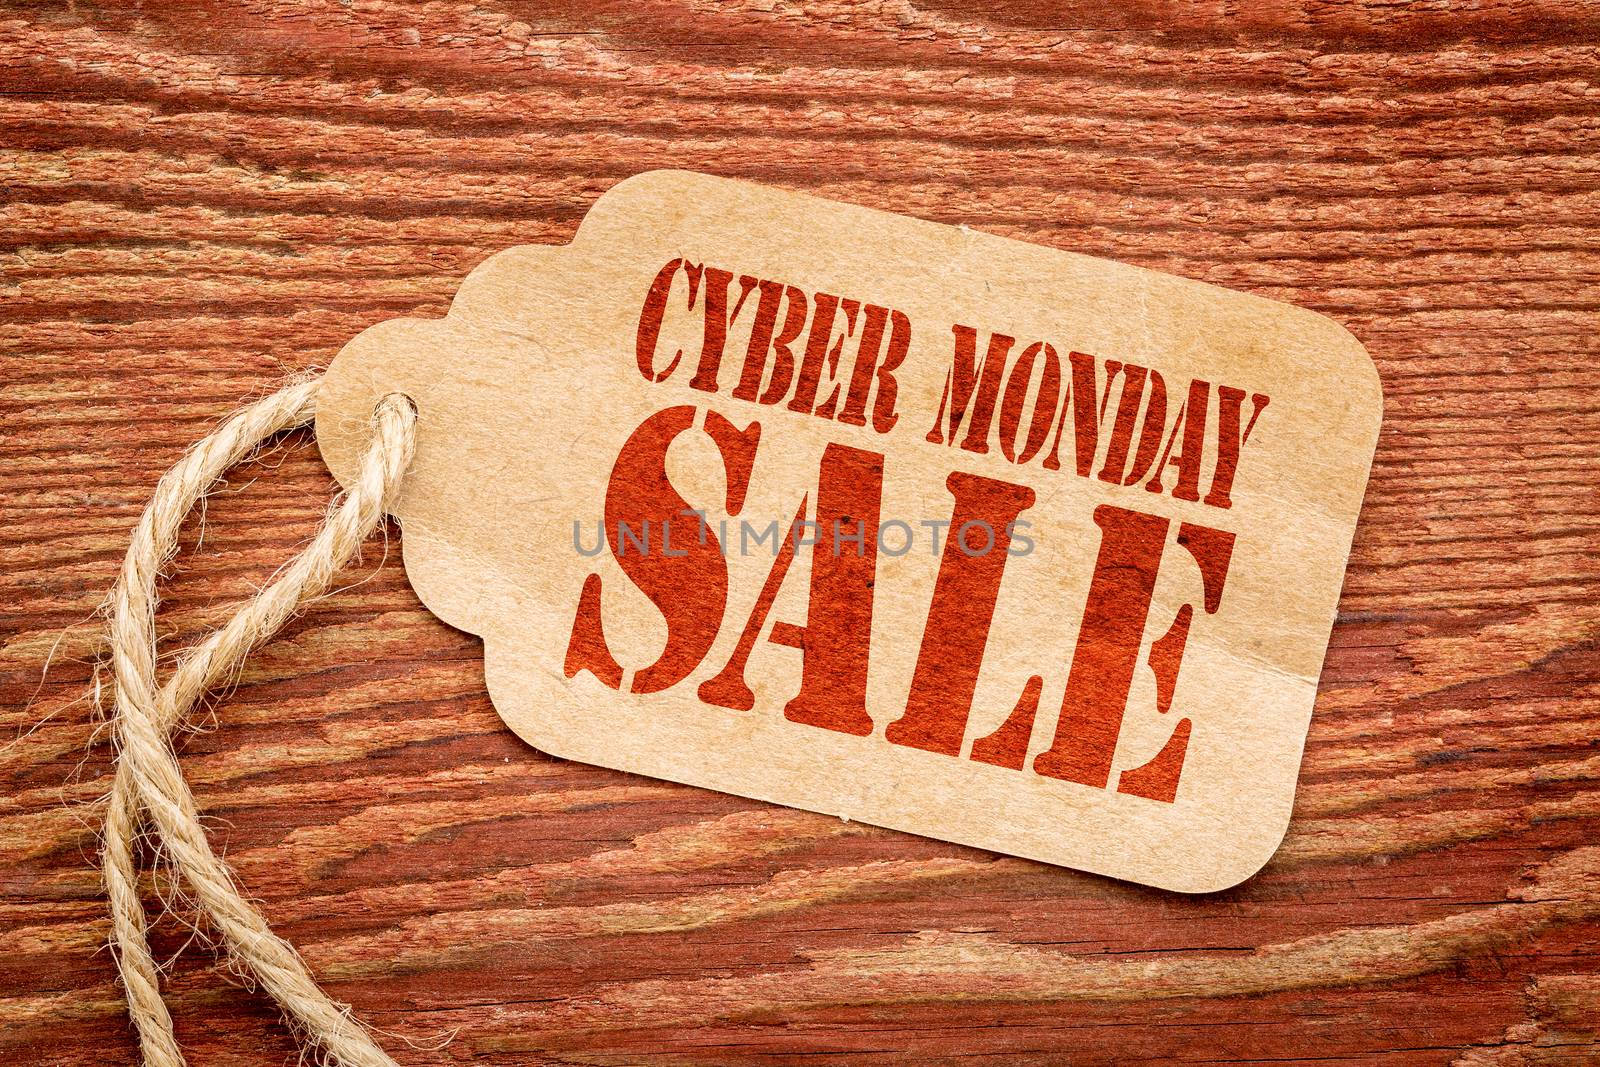 Cyber Monday  sale sign a paper price tag against rustic red painted barn wood